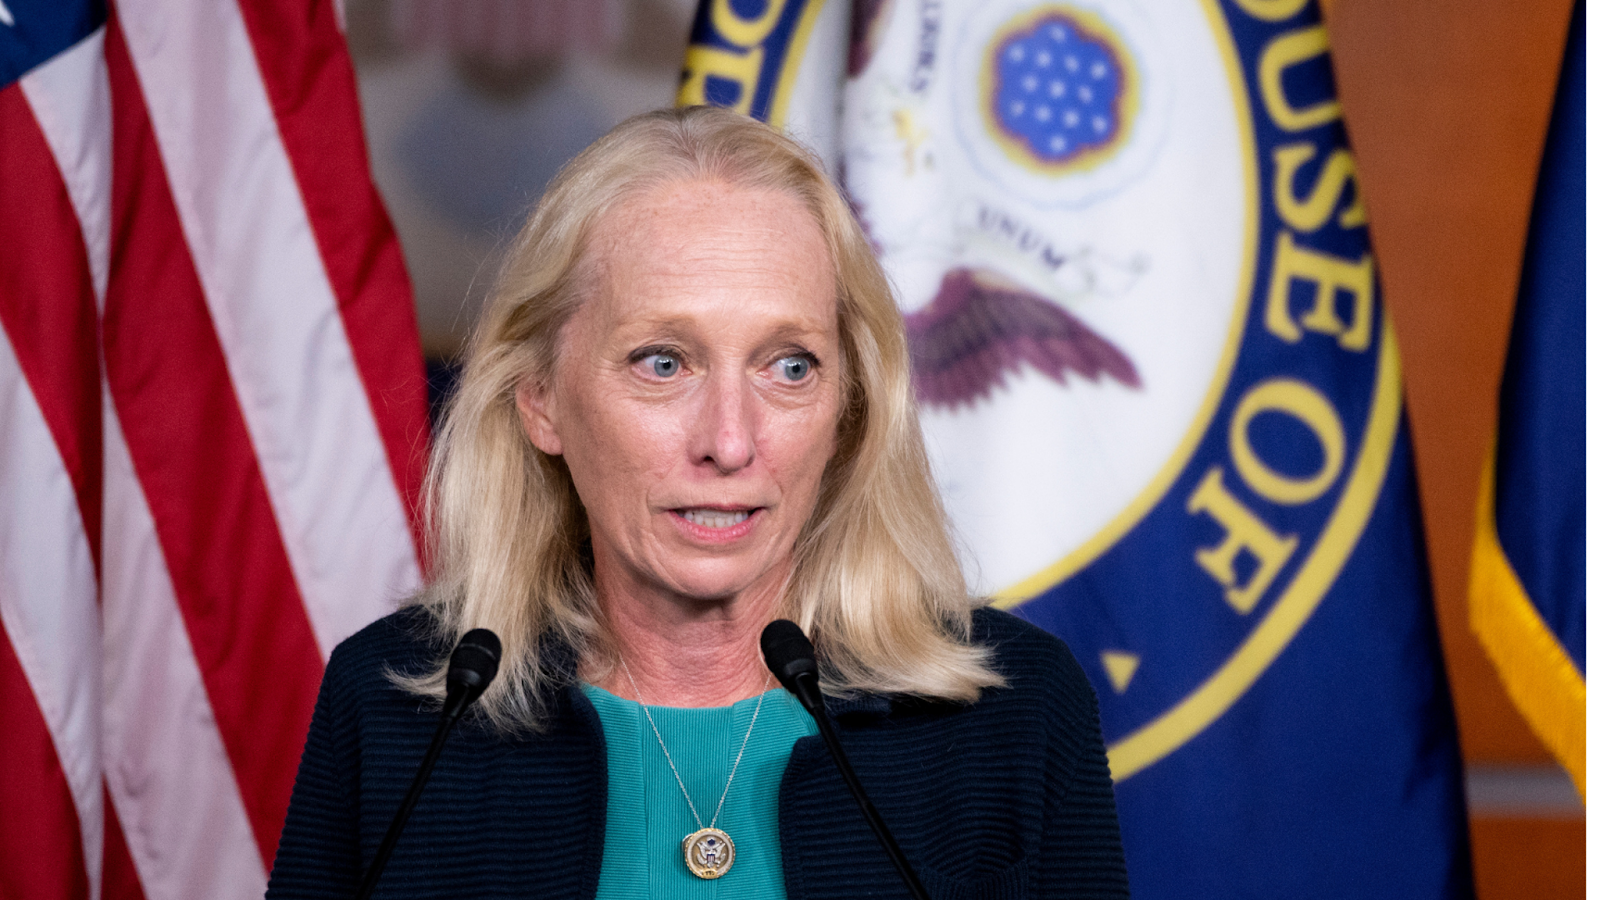 UNITED STATES - SEPTEMBER 21: Rep. Mary Gay Scanlon, D-Pa., speaks during the news conference introducing the Protecting Our Democracy Act in the Capitol on Tuesday, Sept. 21, 2021.